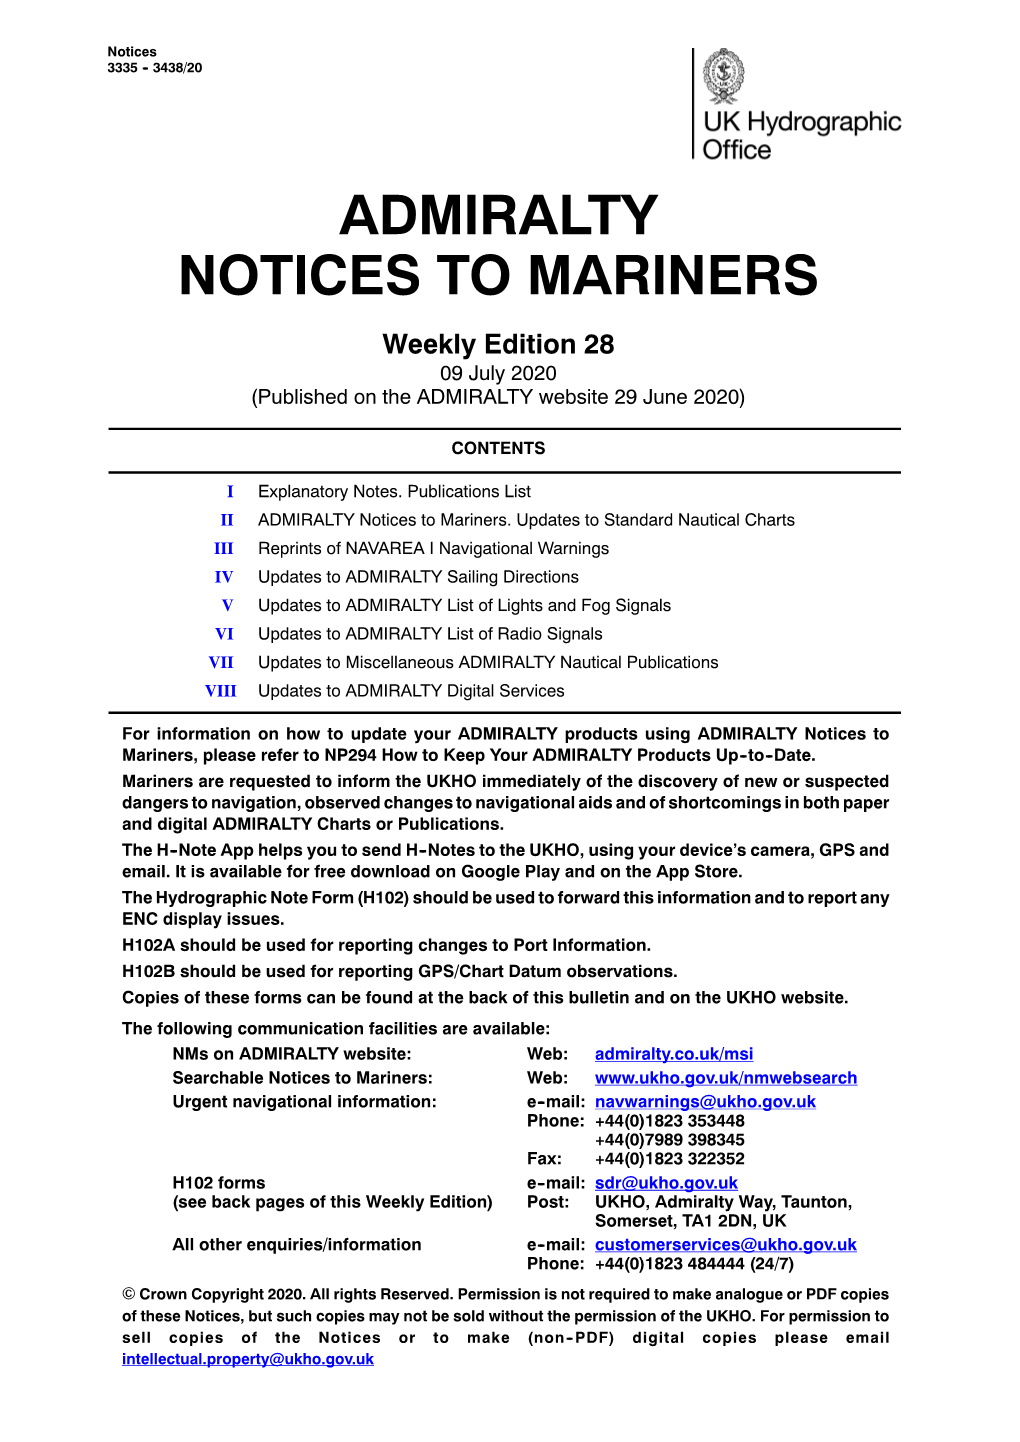 ADMIRALTY NOTICES to MARINERS Weekly Edition 28 09 July 2020 (Published on the ADMIRALTY Website 29 June 2020)